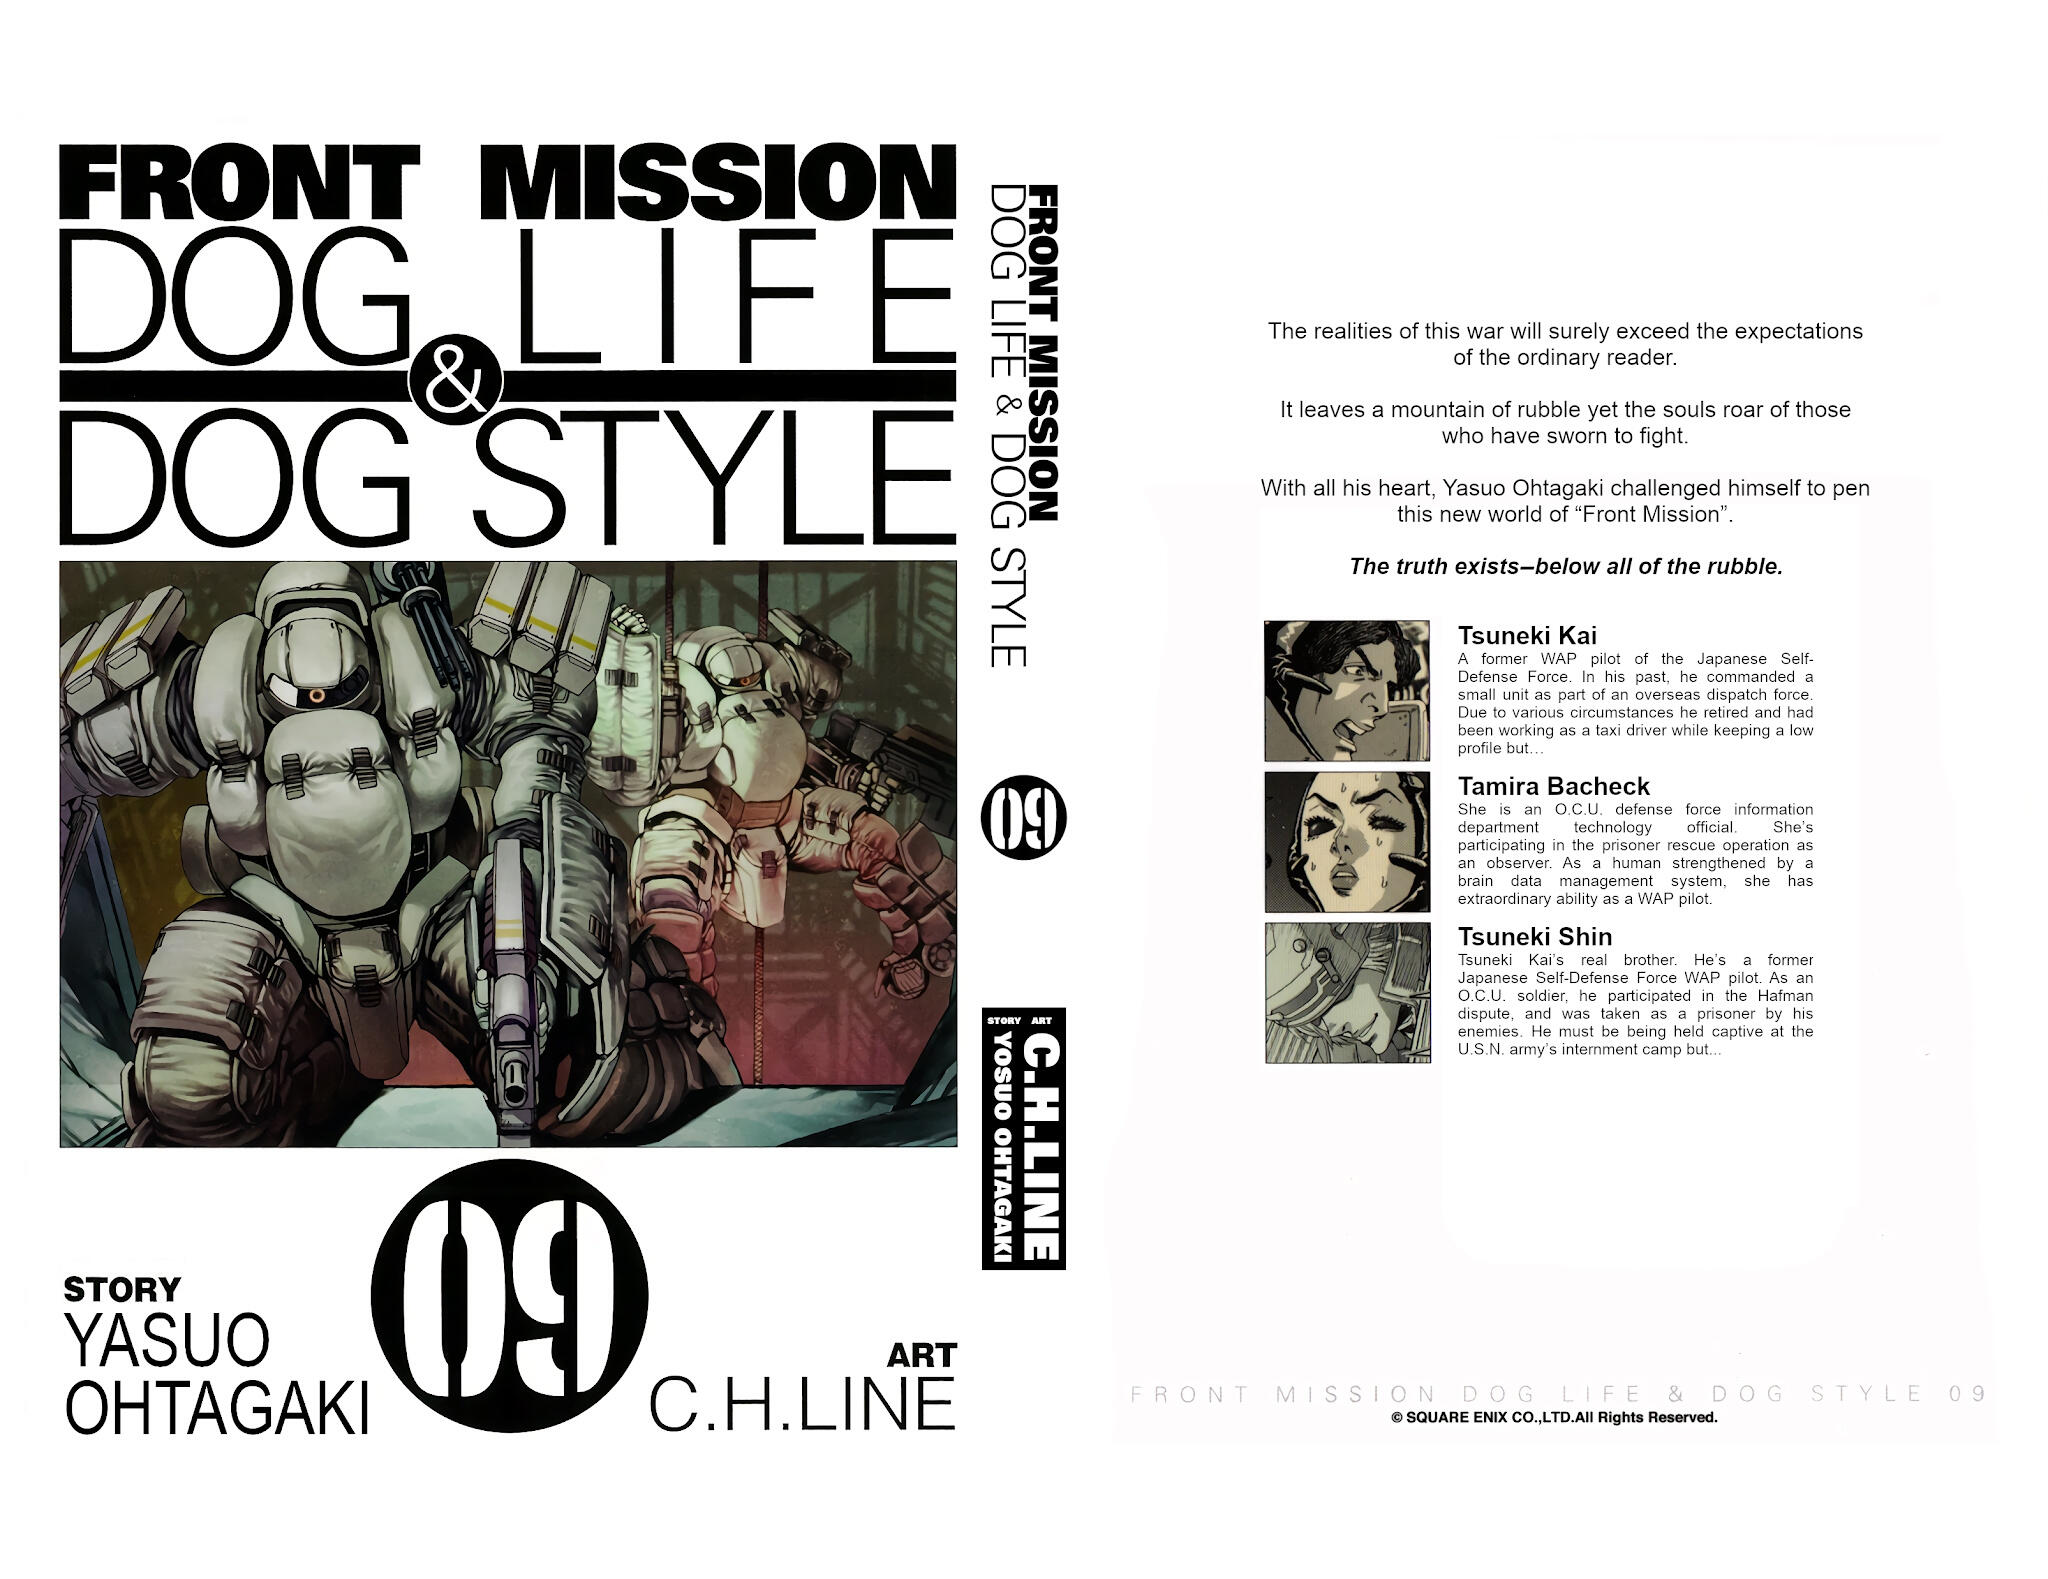 Front Mission Dog Life Dog Style Chapter 71 Read Front Mission Dog Life Dog Style Chapter 71 Online At Allmanga Us Page 1